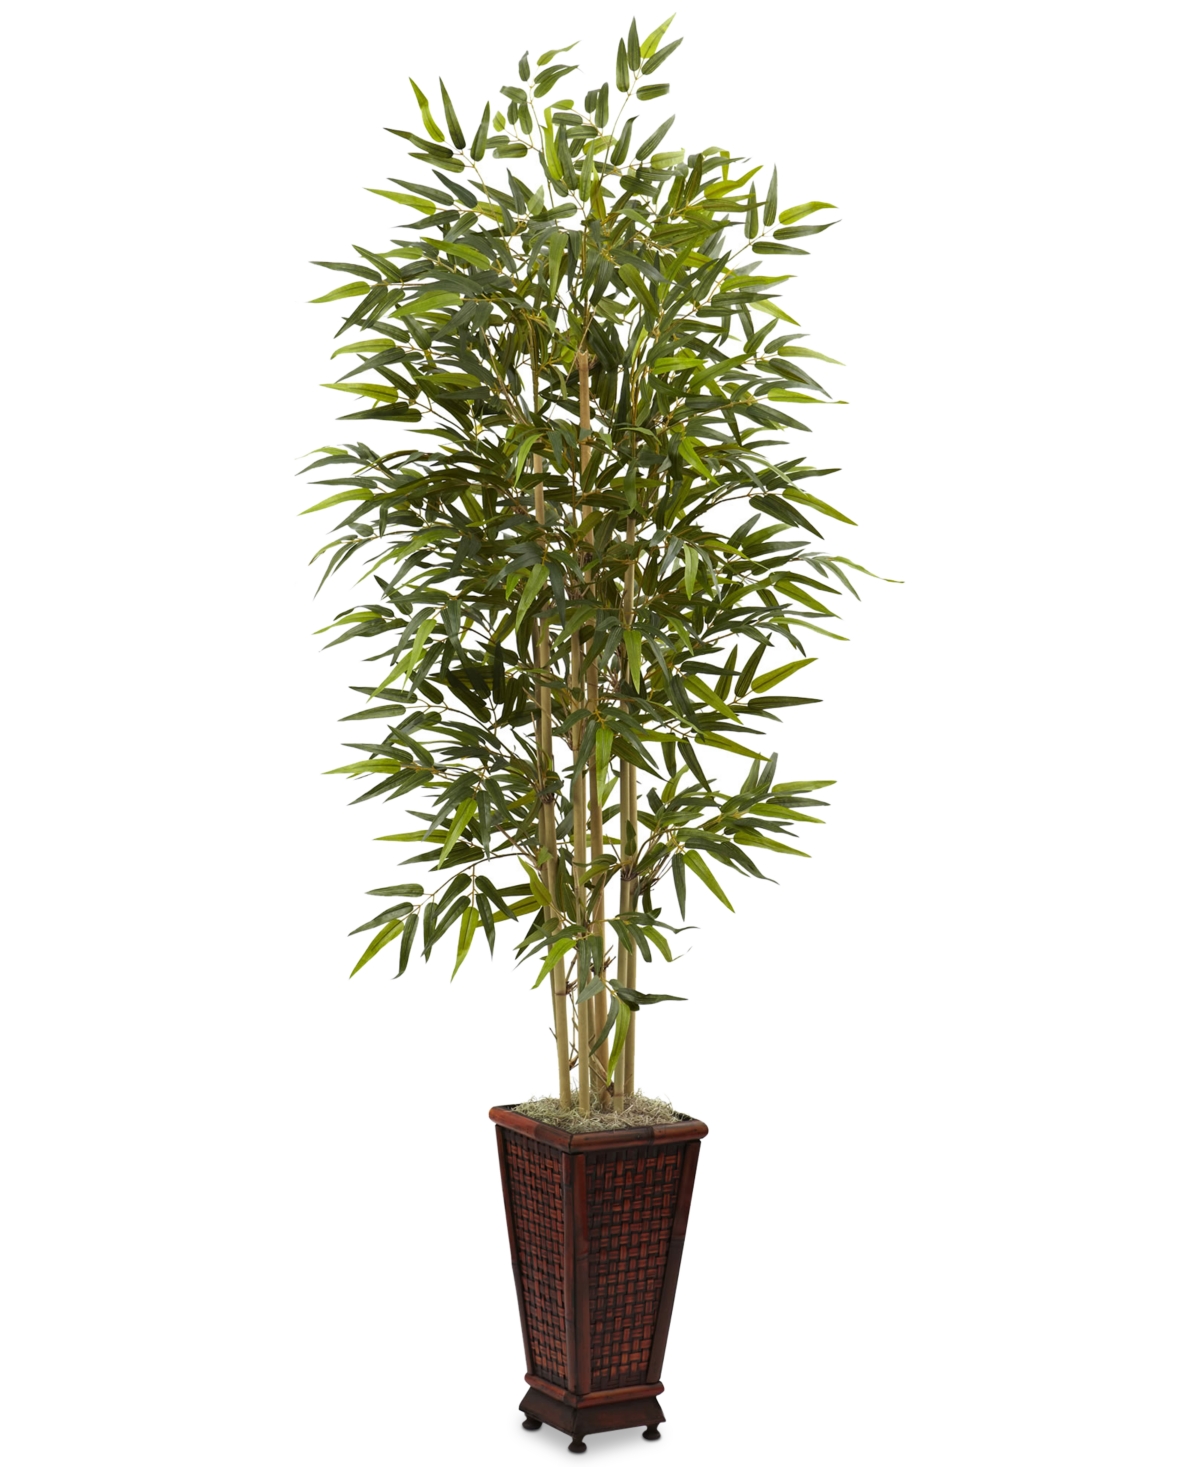 6' Bamboo Artificial Tree in Decorative Planter - Green